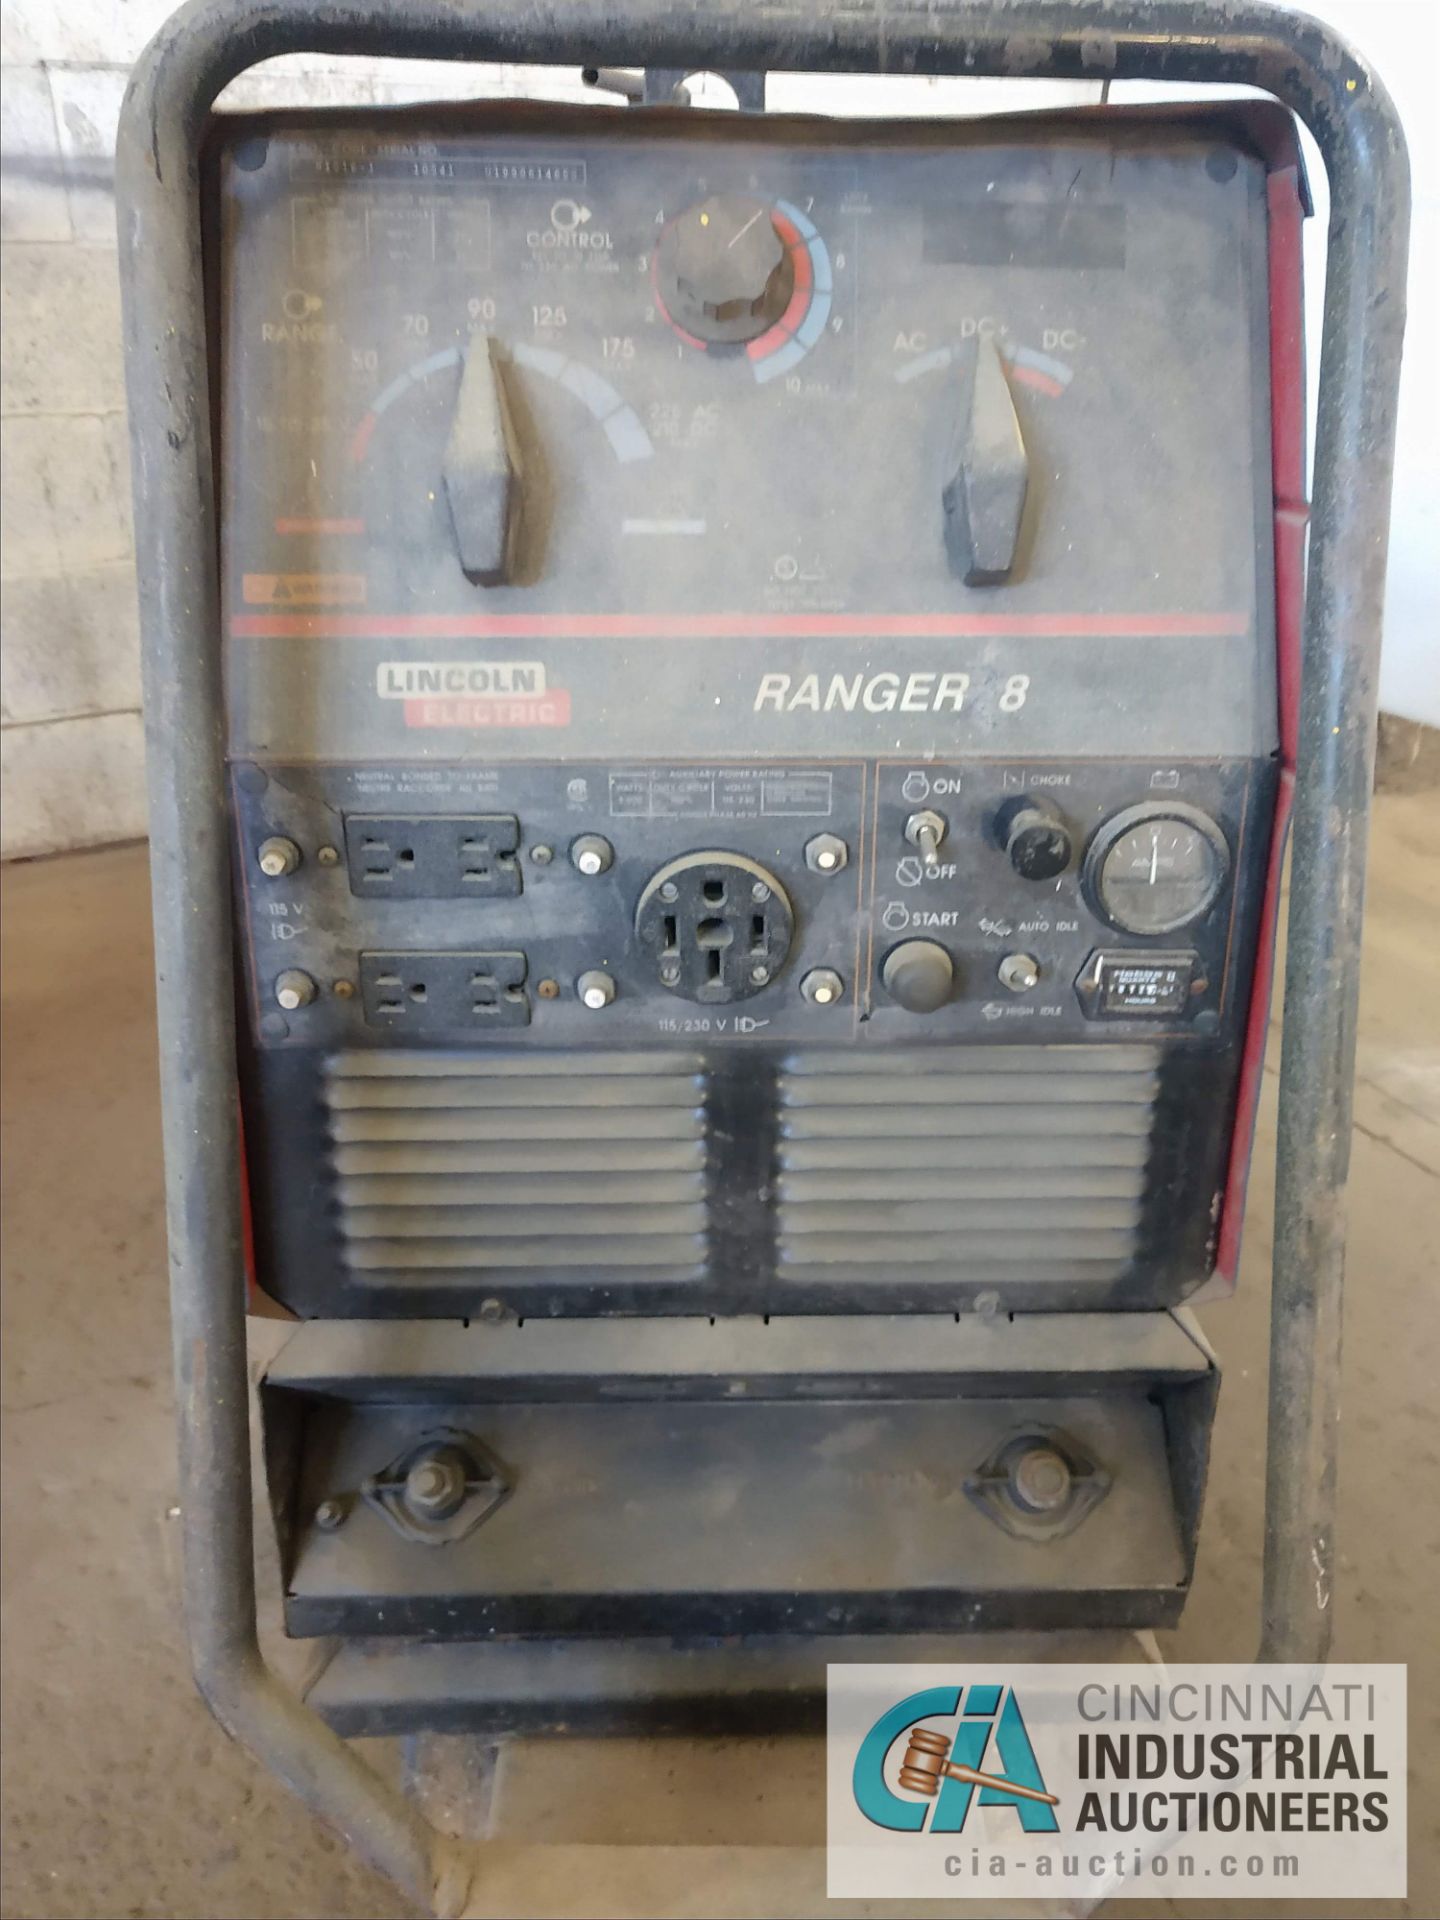 LINCOLN MODEL RANGER 8 WELDER GENERATOR - $20.00 Rigging Fee Due to Onsite Rigger - Located in - Image 3 of 4